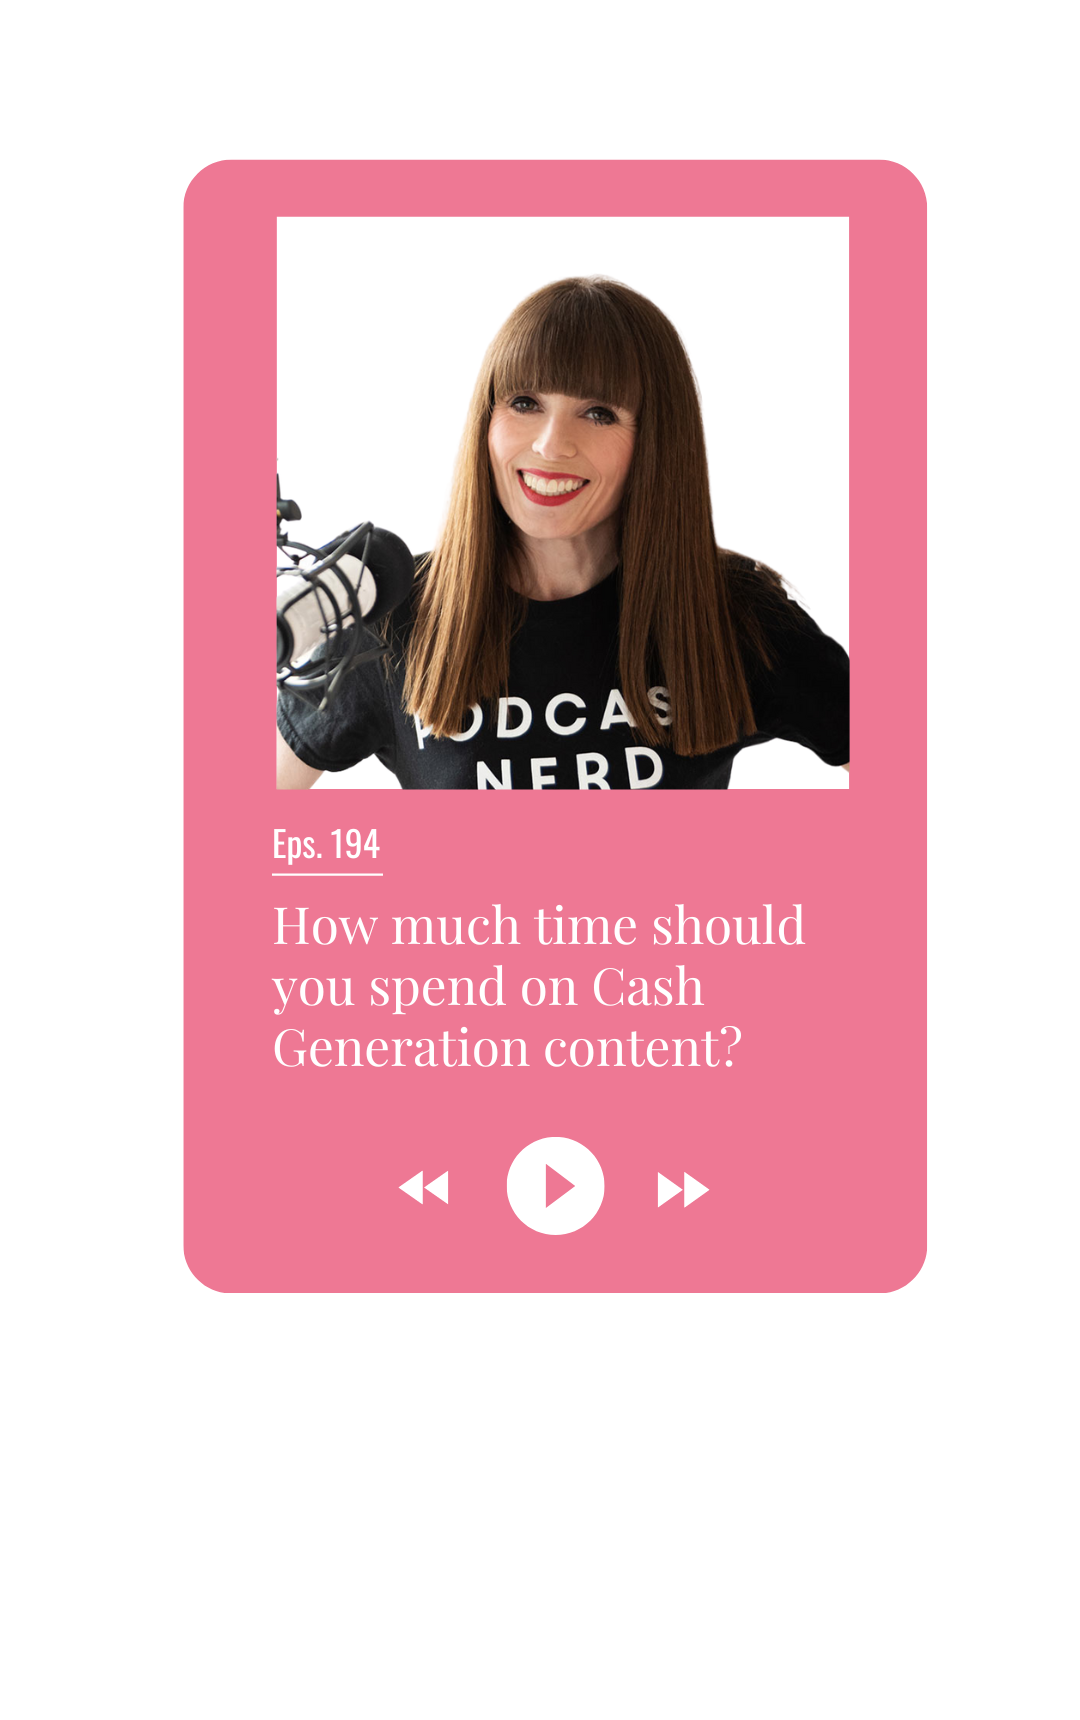 How much time should you spend on Cash Generation content?